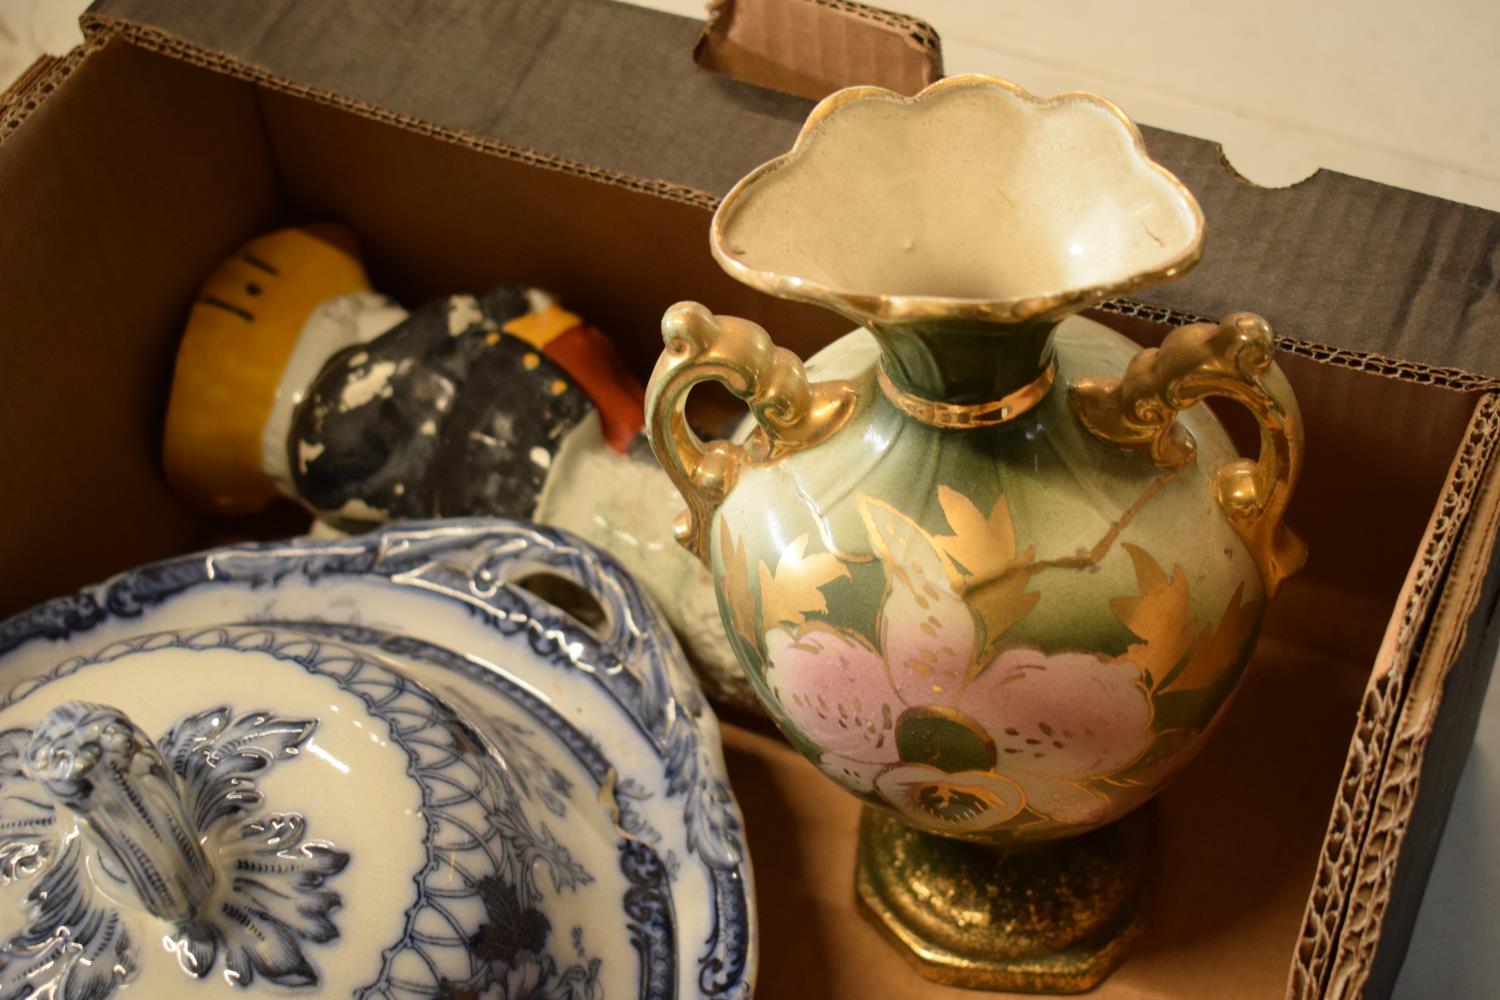 A collection of 19th century Staffordshire pottery to include Mayers jugs, Toby jugs, Moultan tureen - Image 4 of 4